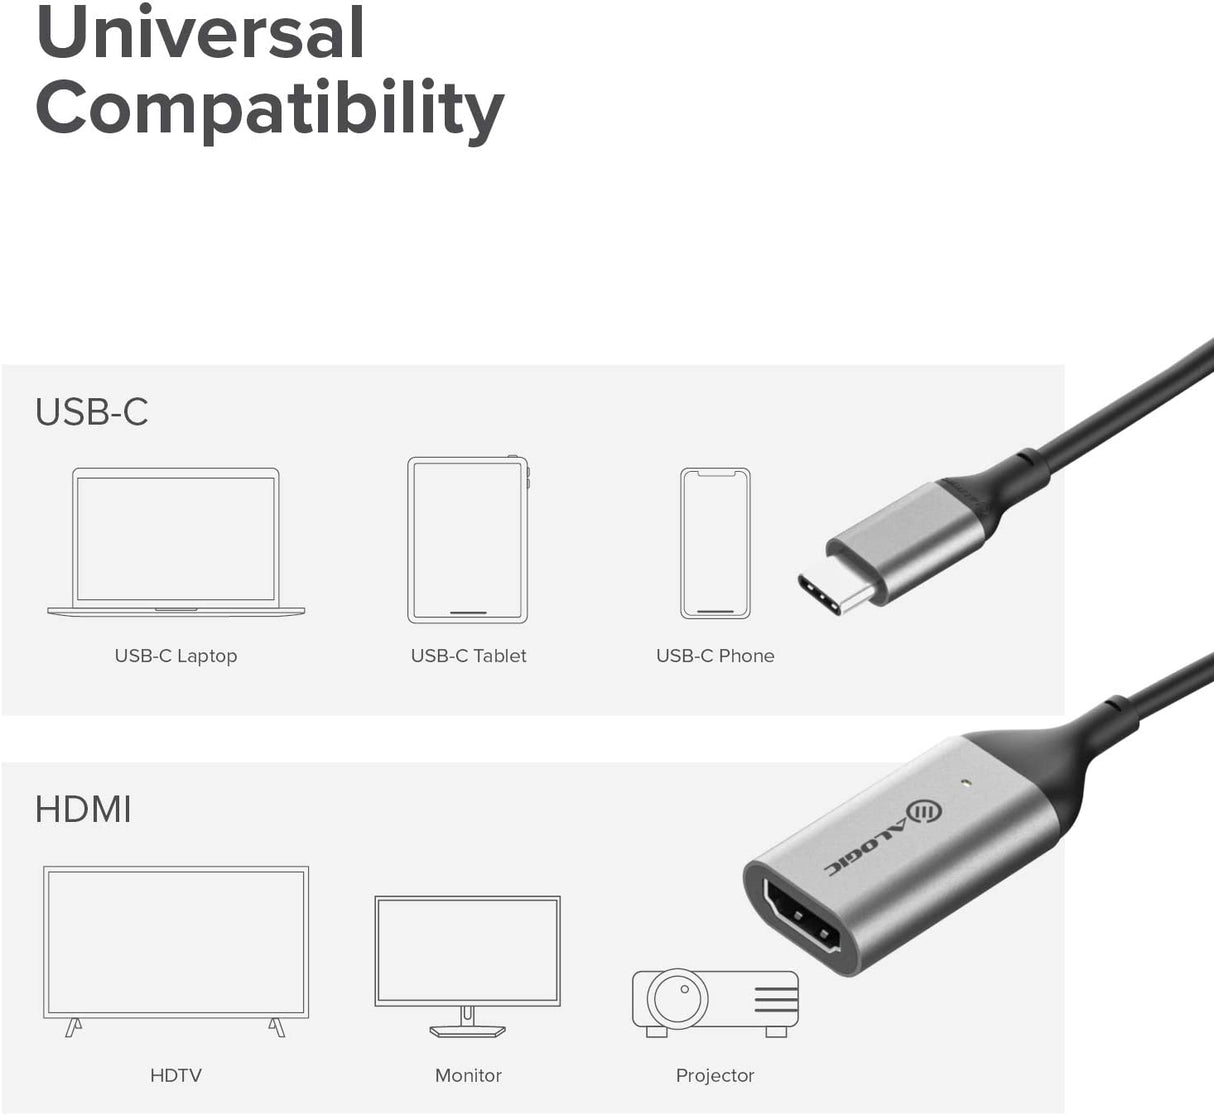 ALOGIC USB C to HDMI Adapter, Supports HDMI 4K 60Hz (Thunderbolt 3 Compatible) for MacBook Pro, MacBook Air, iPad Pro/Air 2020, Pixelbook, XPS, Galaxy, and More - Dealtargets.com